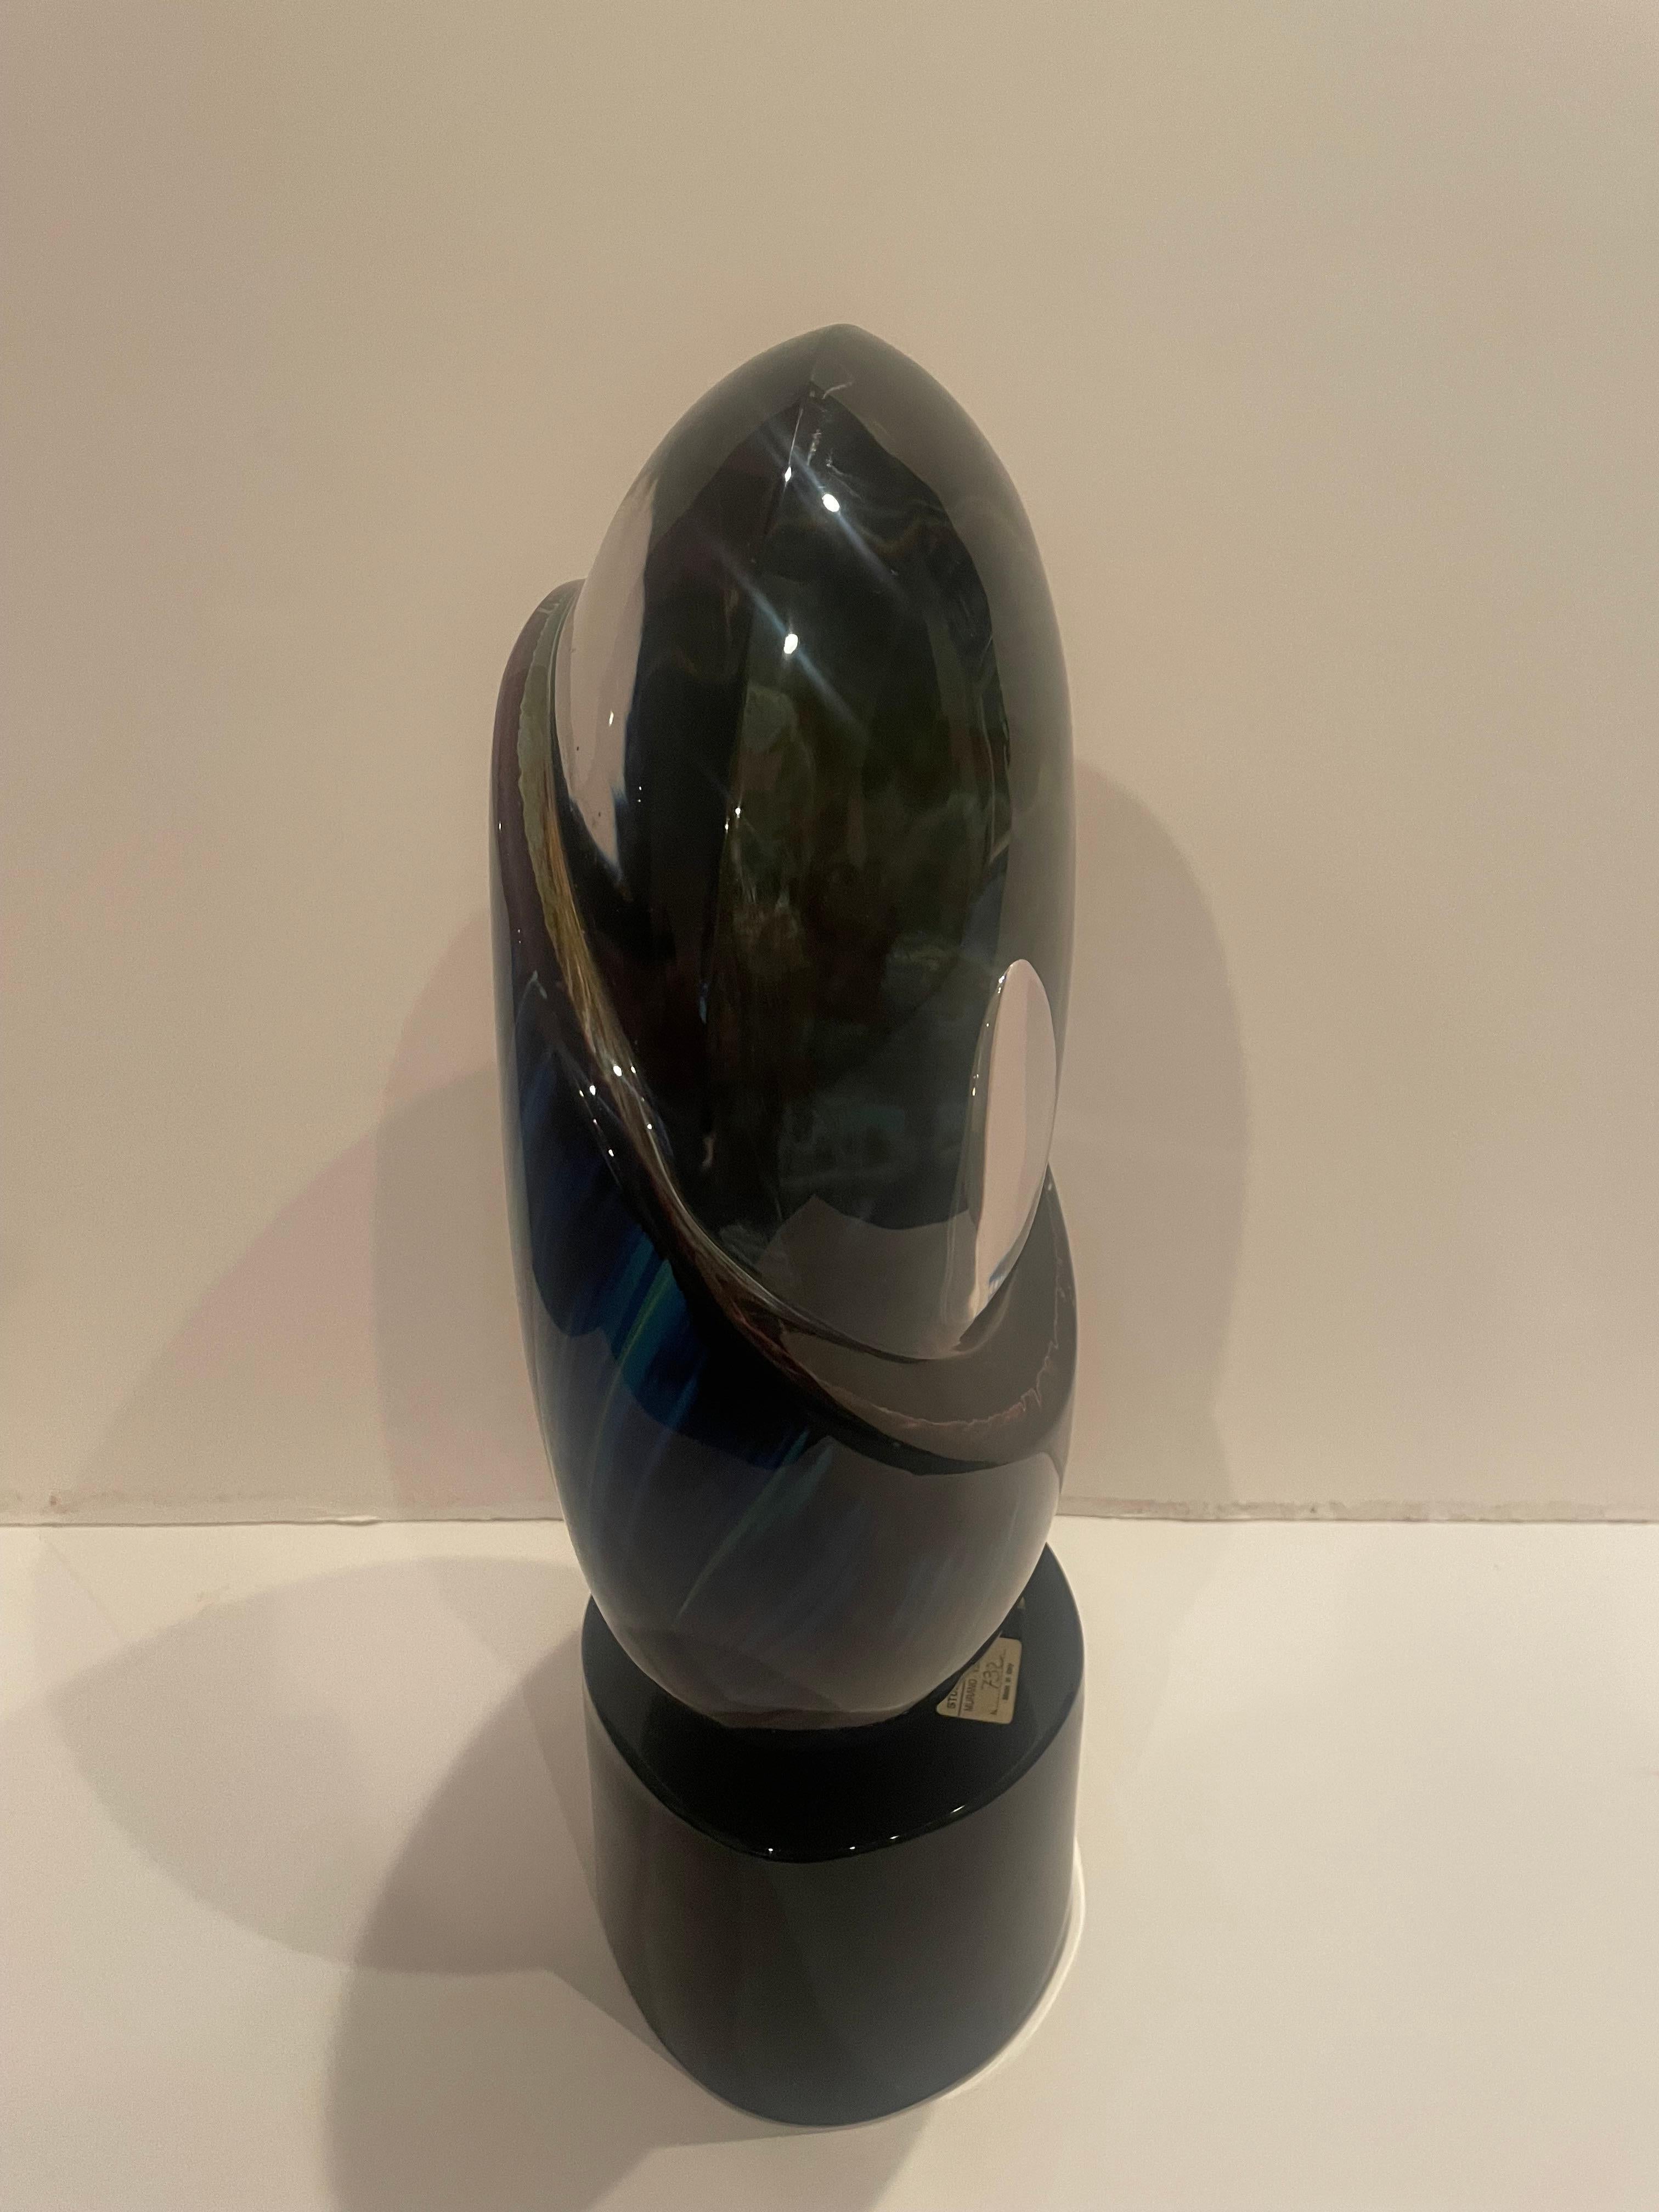 This is an original glass sculpture “The Original Birth of the Universe” by Dino rosin . Measures 17x11 in excellent condition. No chips or scratches.

International buyers must cover shipping expense